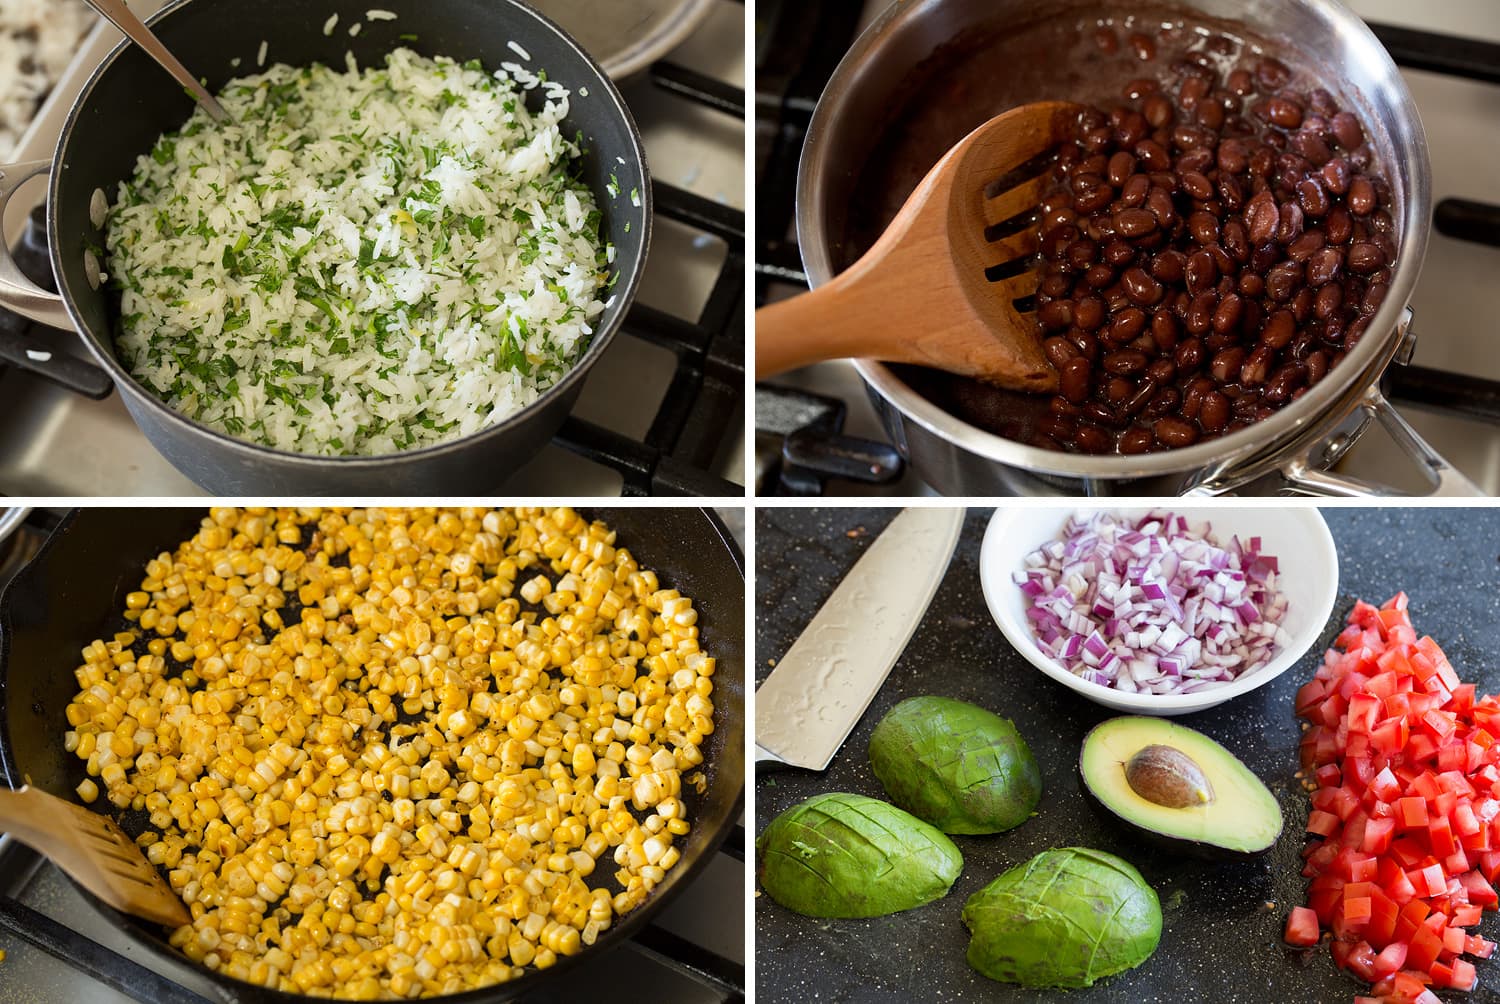 Making toppings for burrito bowl.